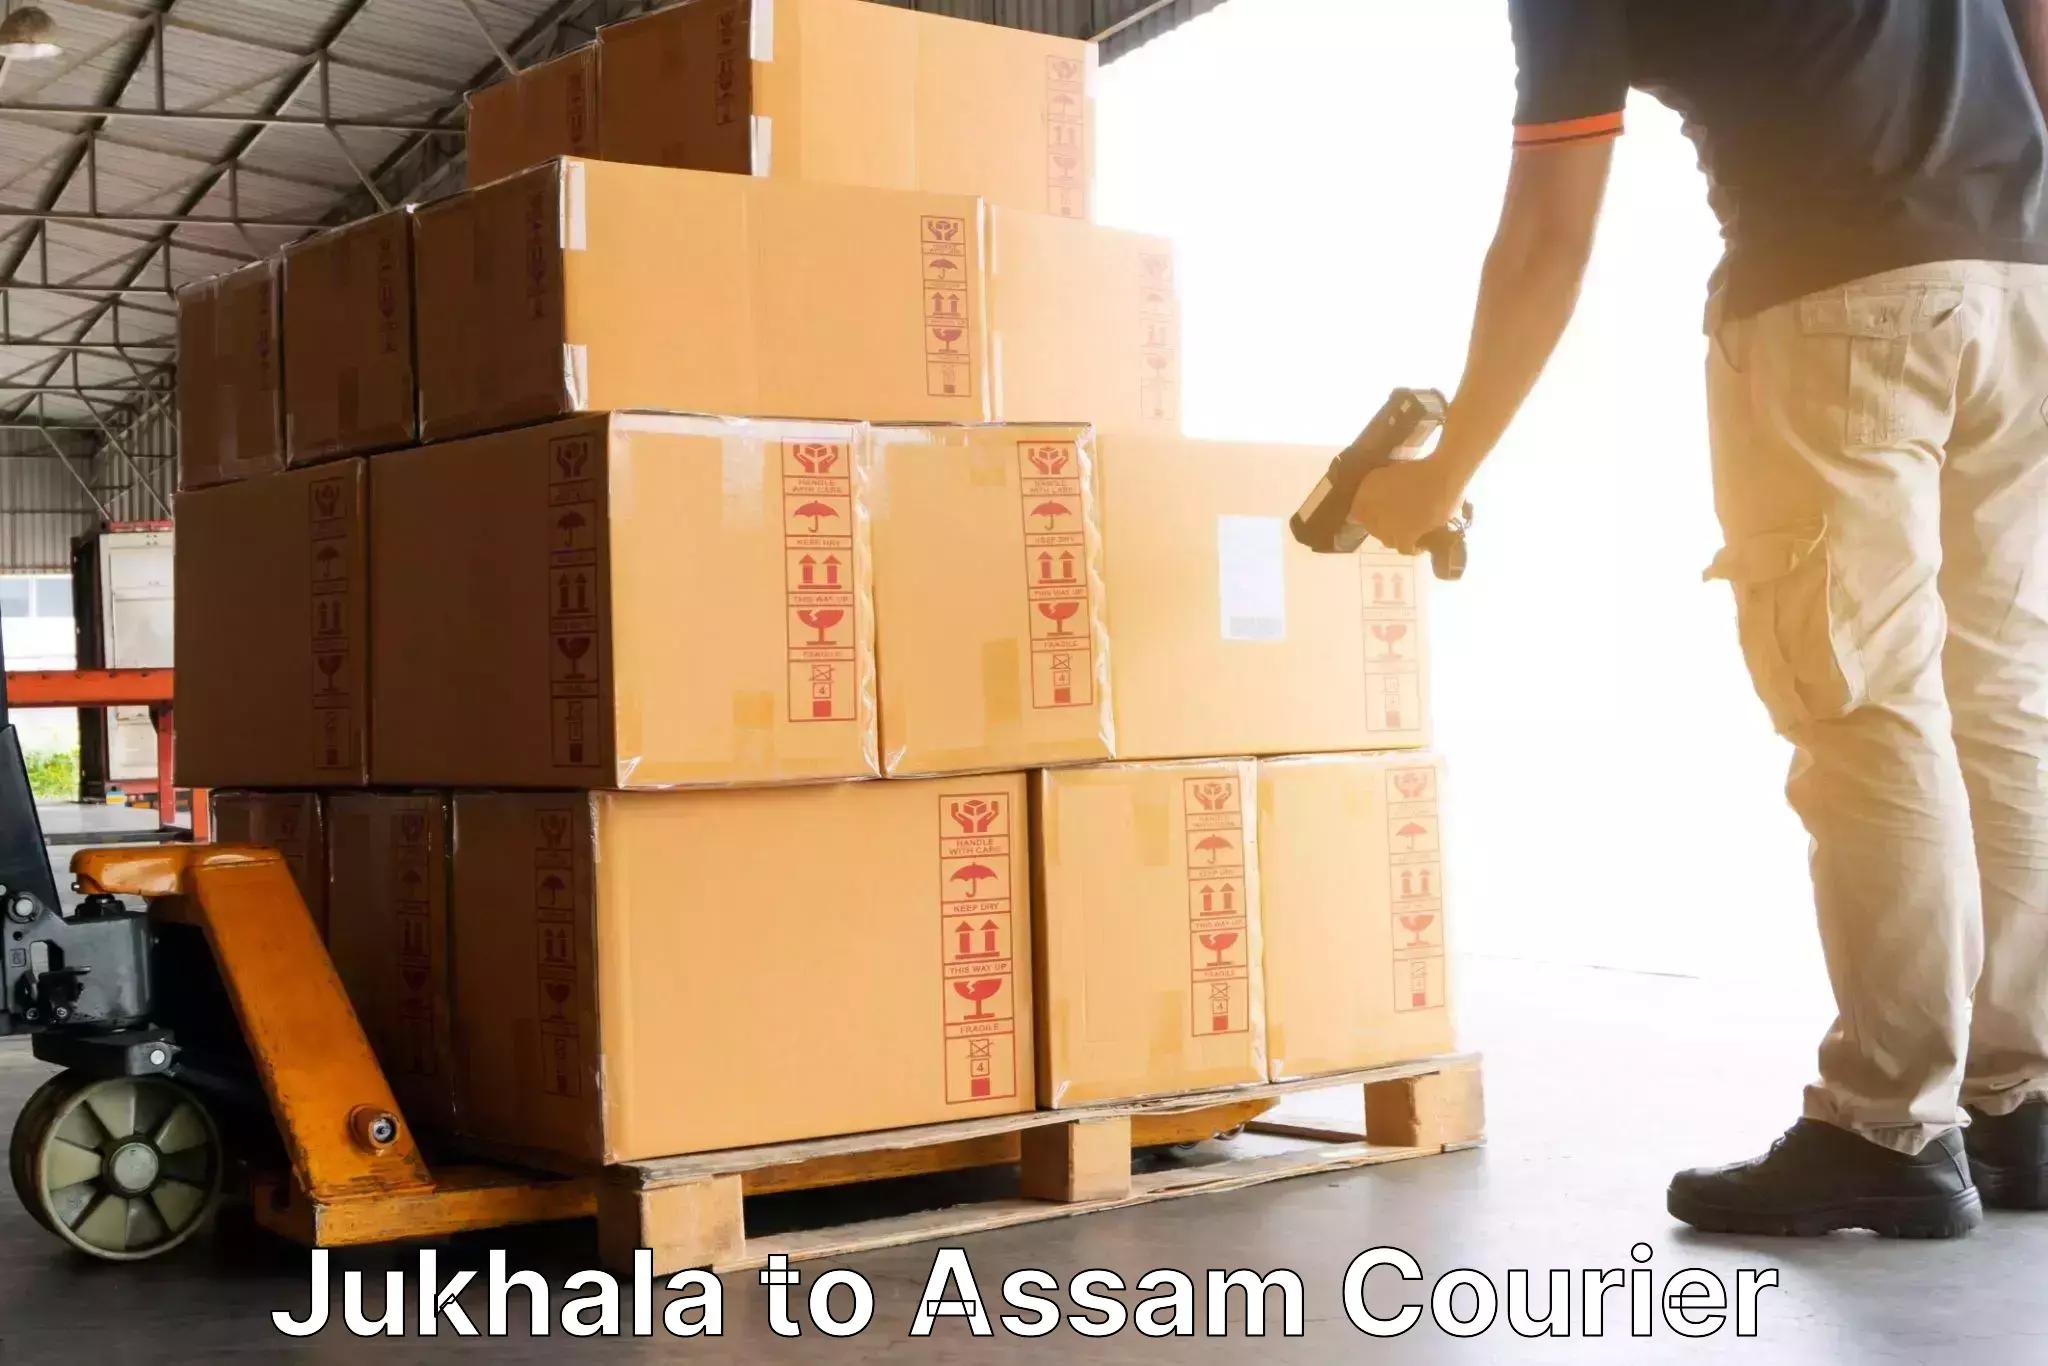 Courier services in Jukhala to Bilasipara